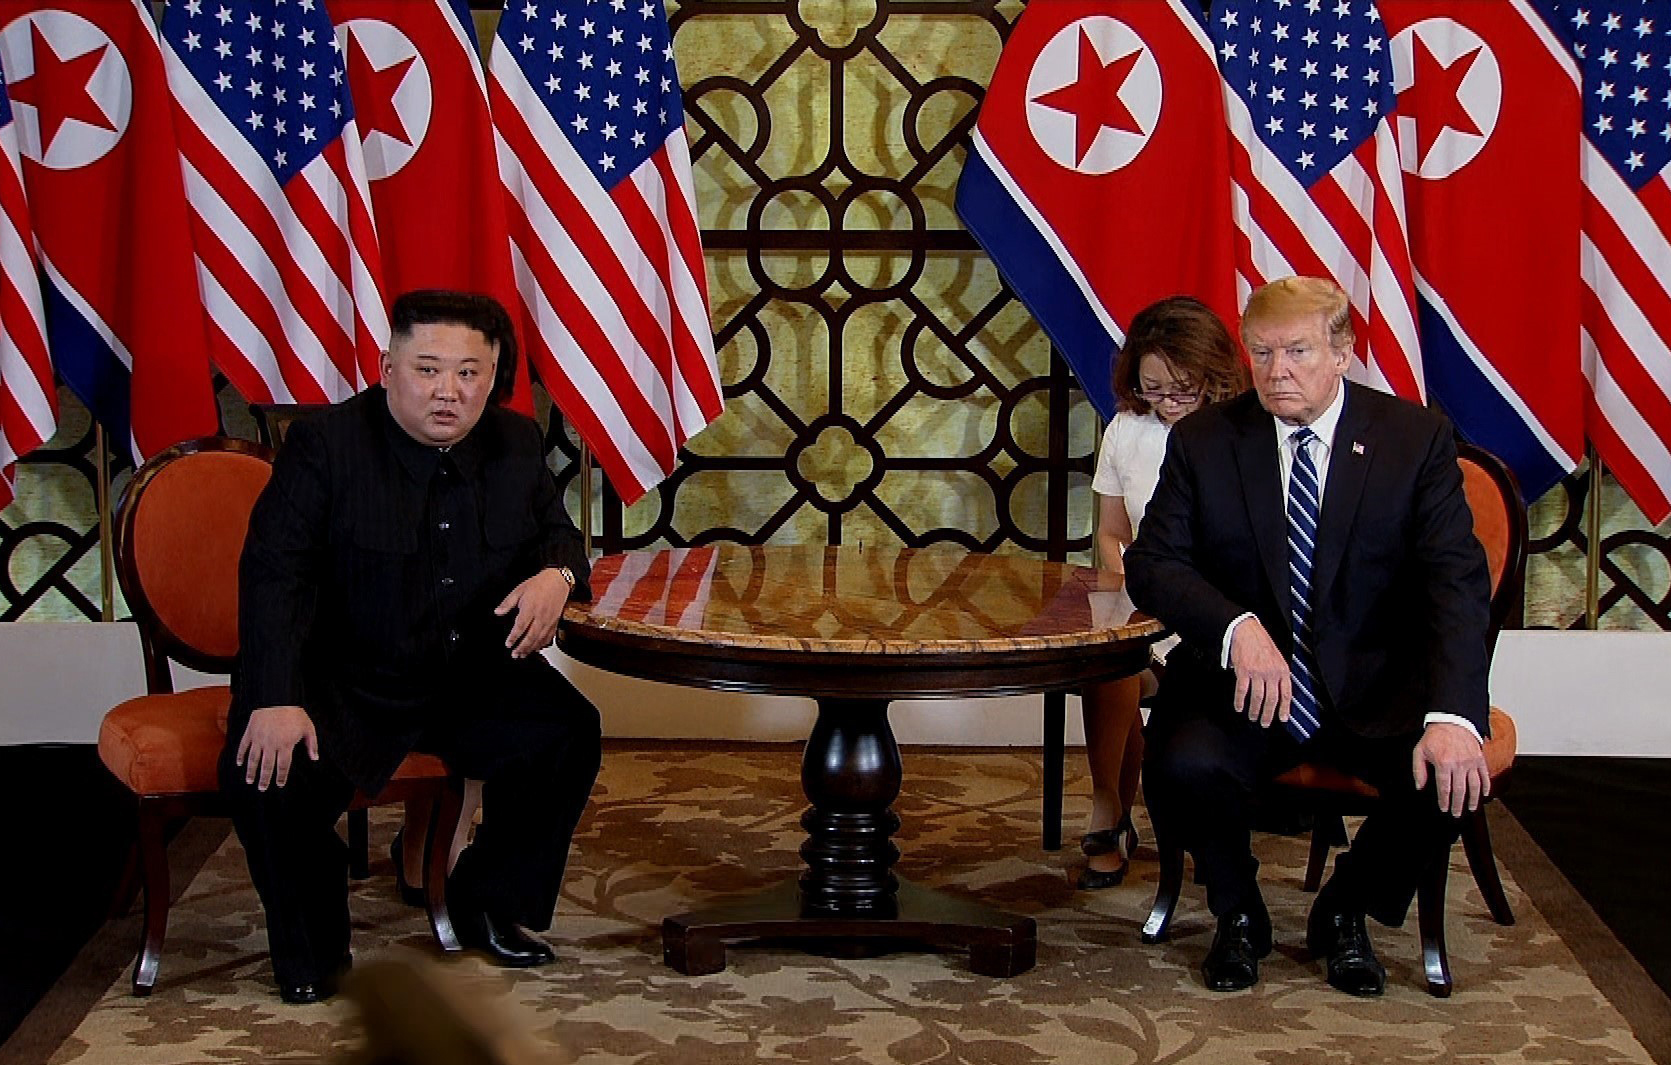 President Donald Trump and North Korean leader Kim Jong-un during their second summit meeting on February 28, 2019 in Hanoi, Vietnam.&nbsp;